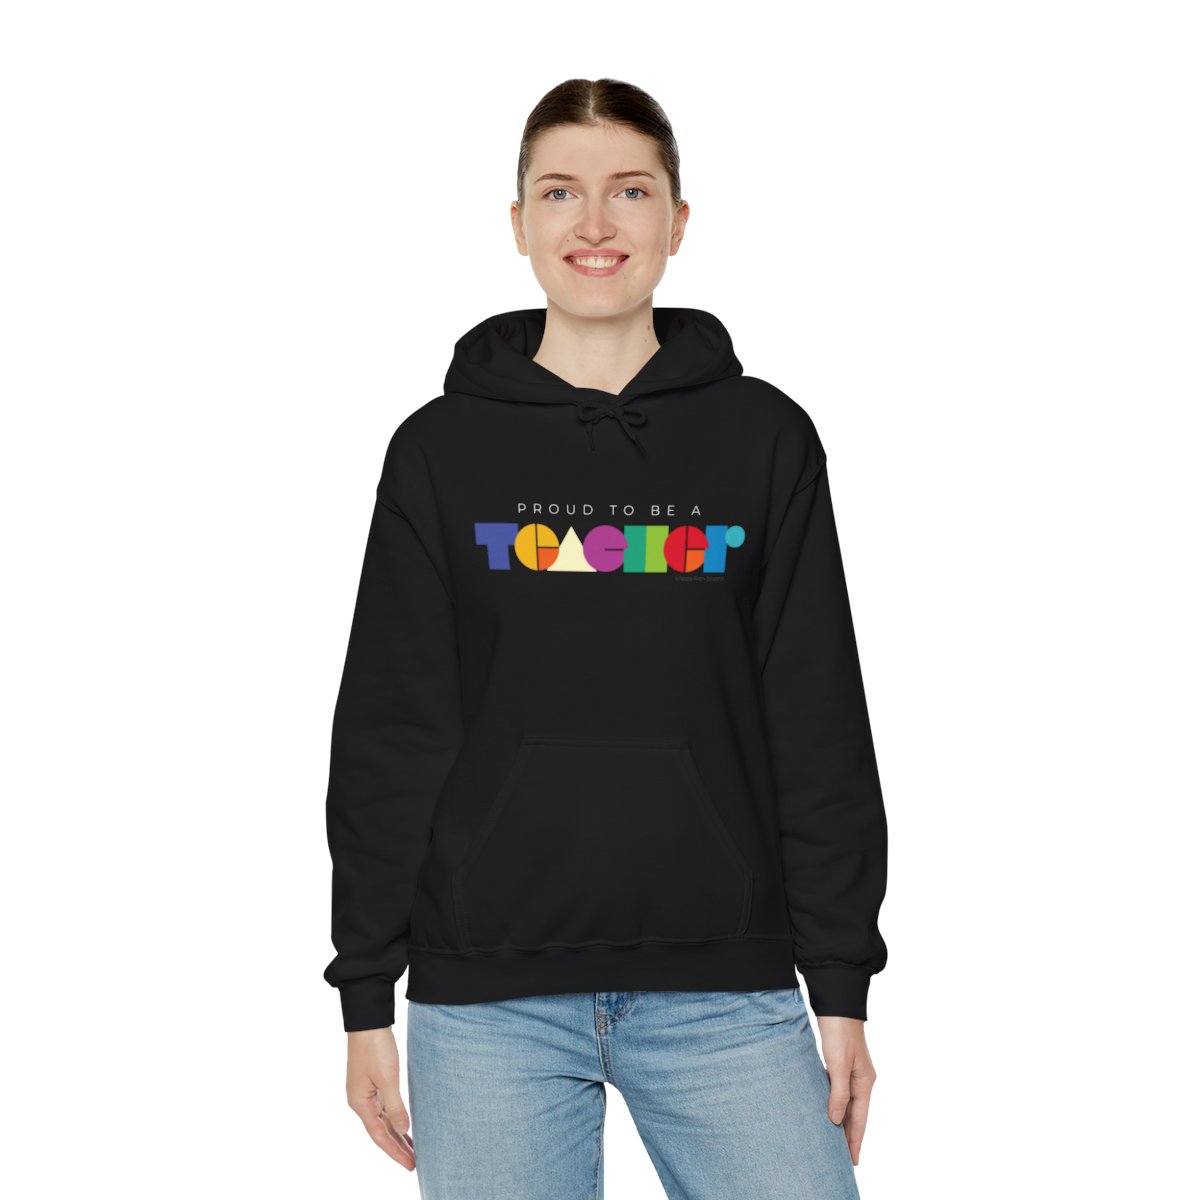 Proud to be a Teacher - Unisex Heavy Blend Hooded Sweatshirt for Teachers product thumbnail image